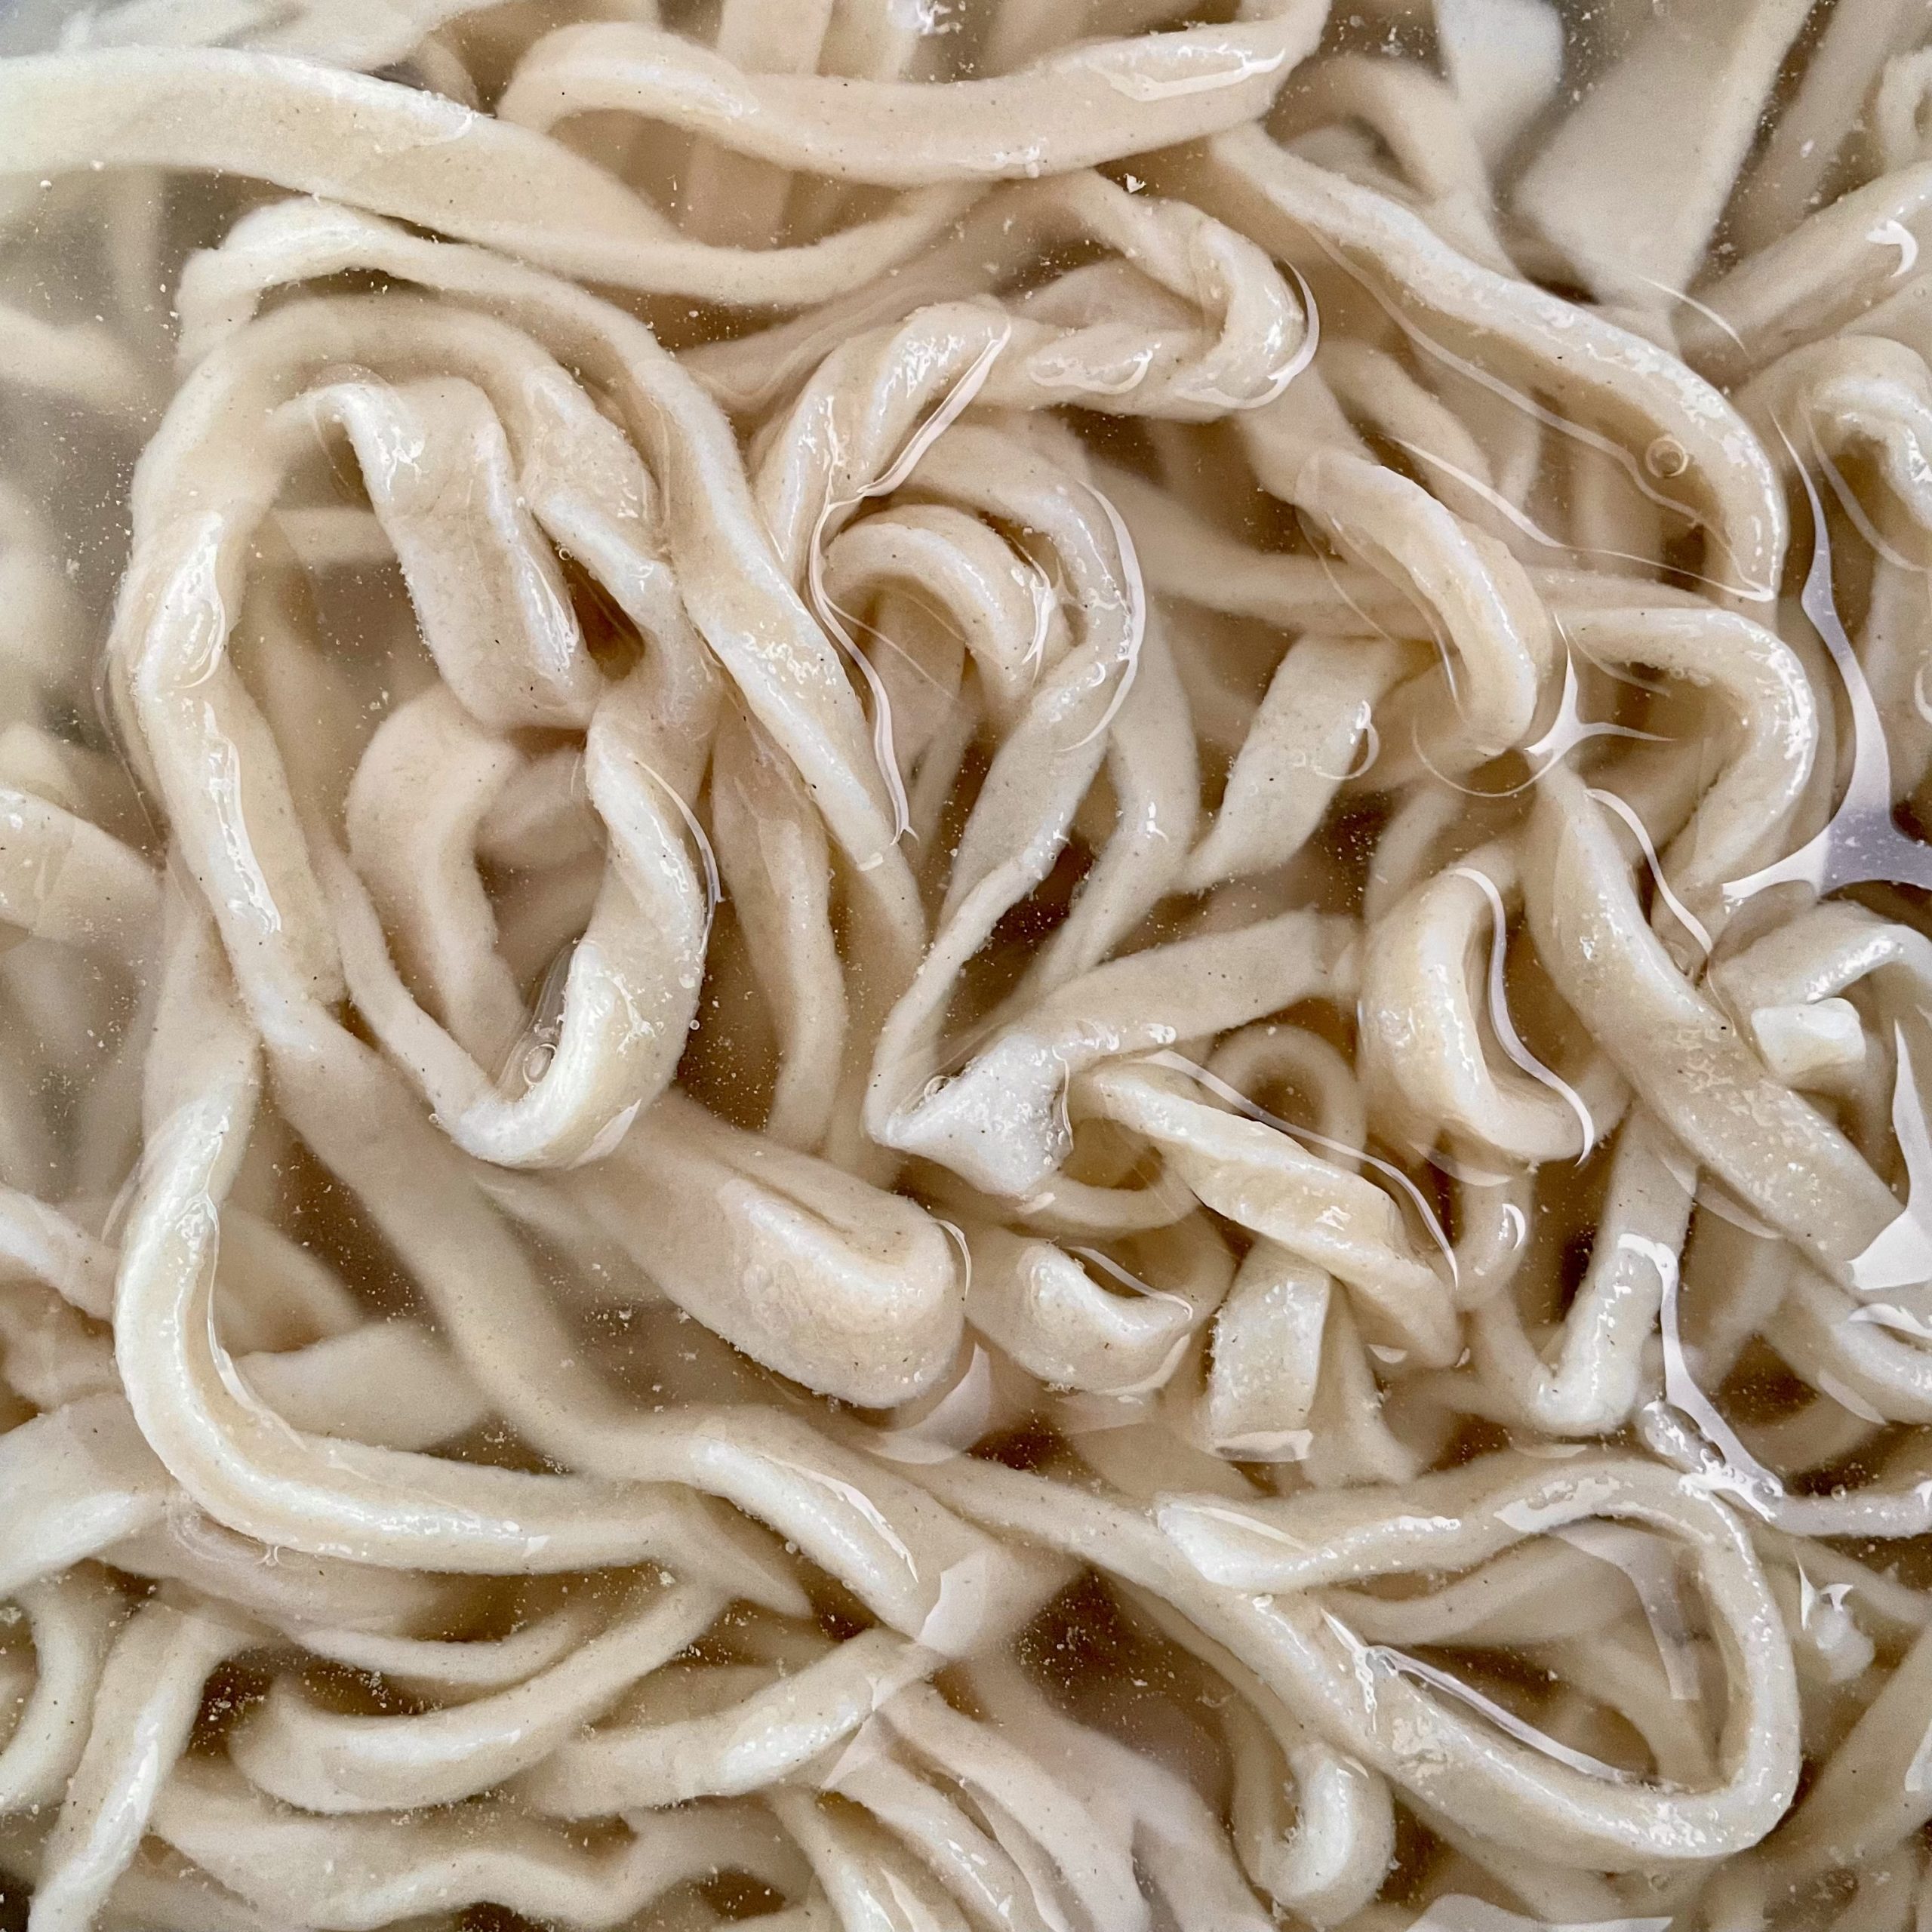 Handmade Noodles (Super Chewy)